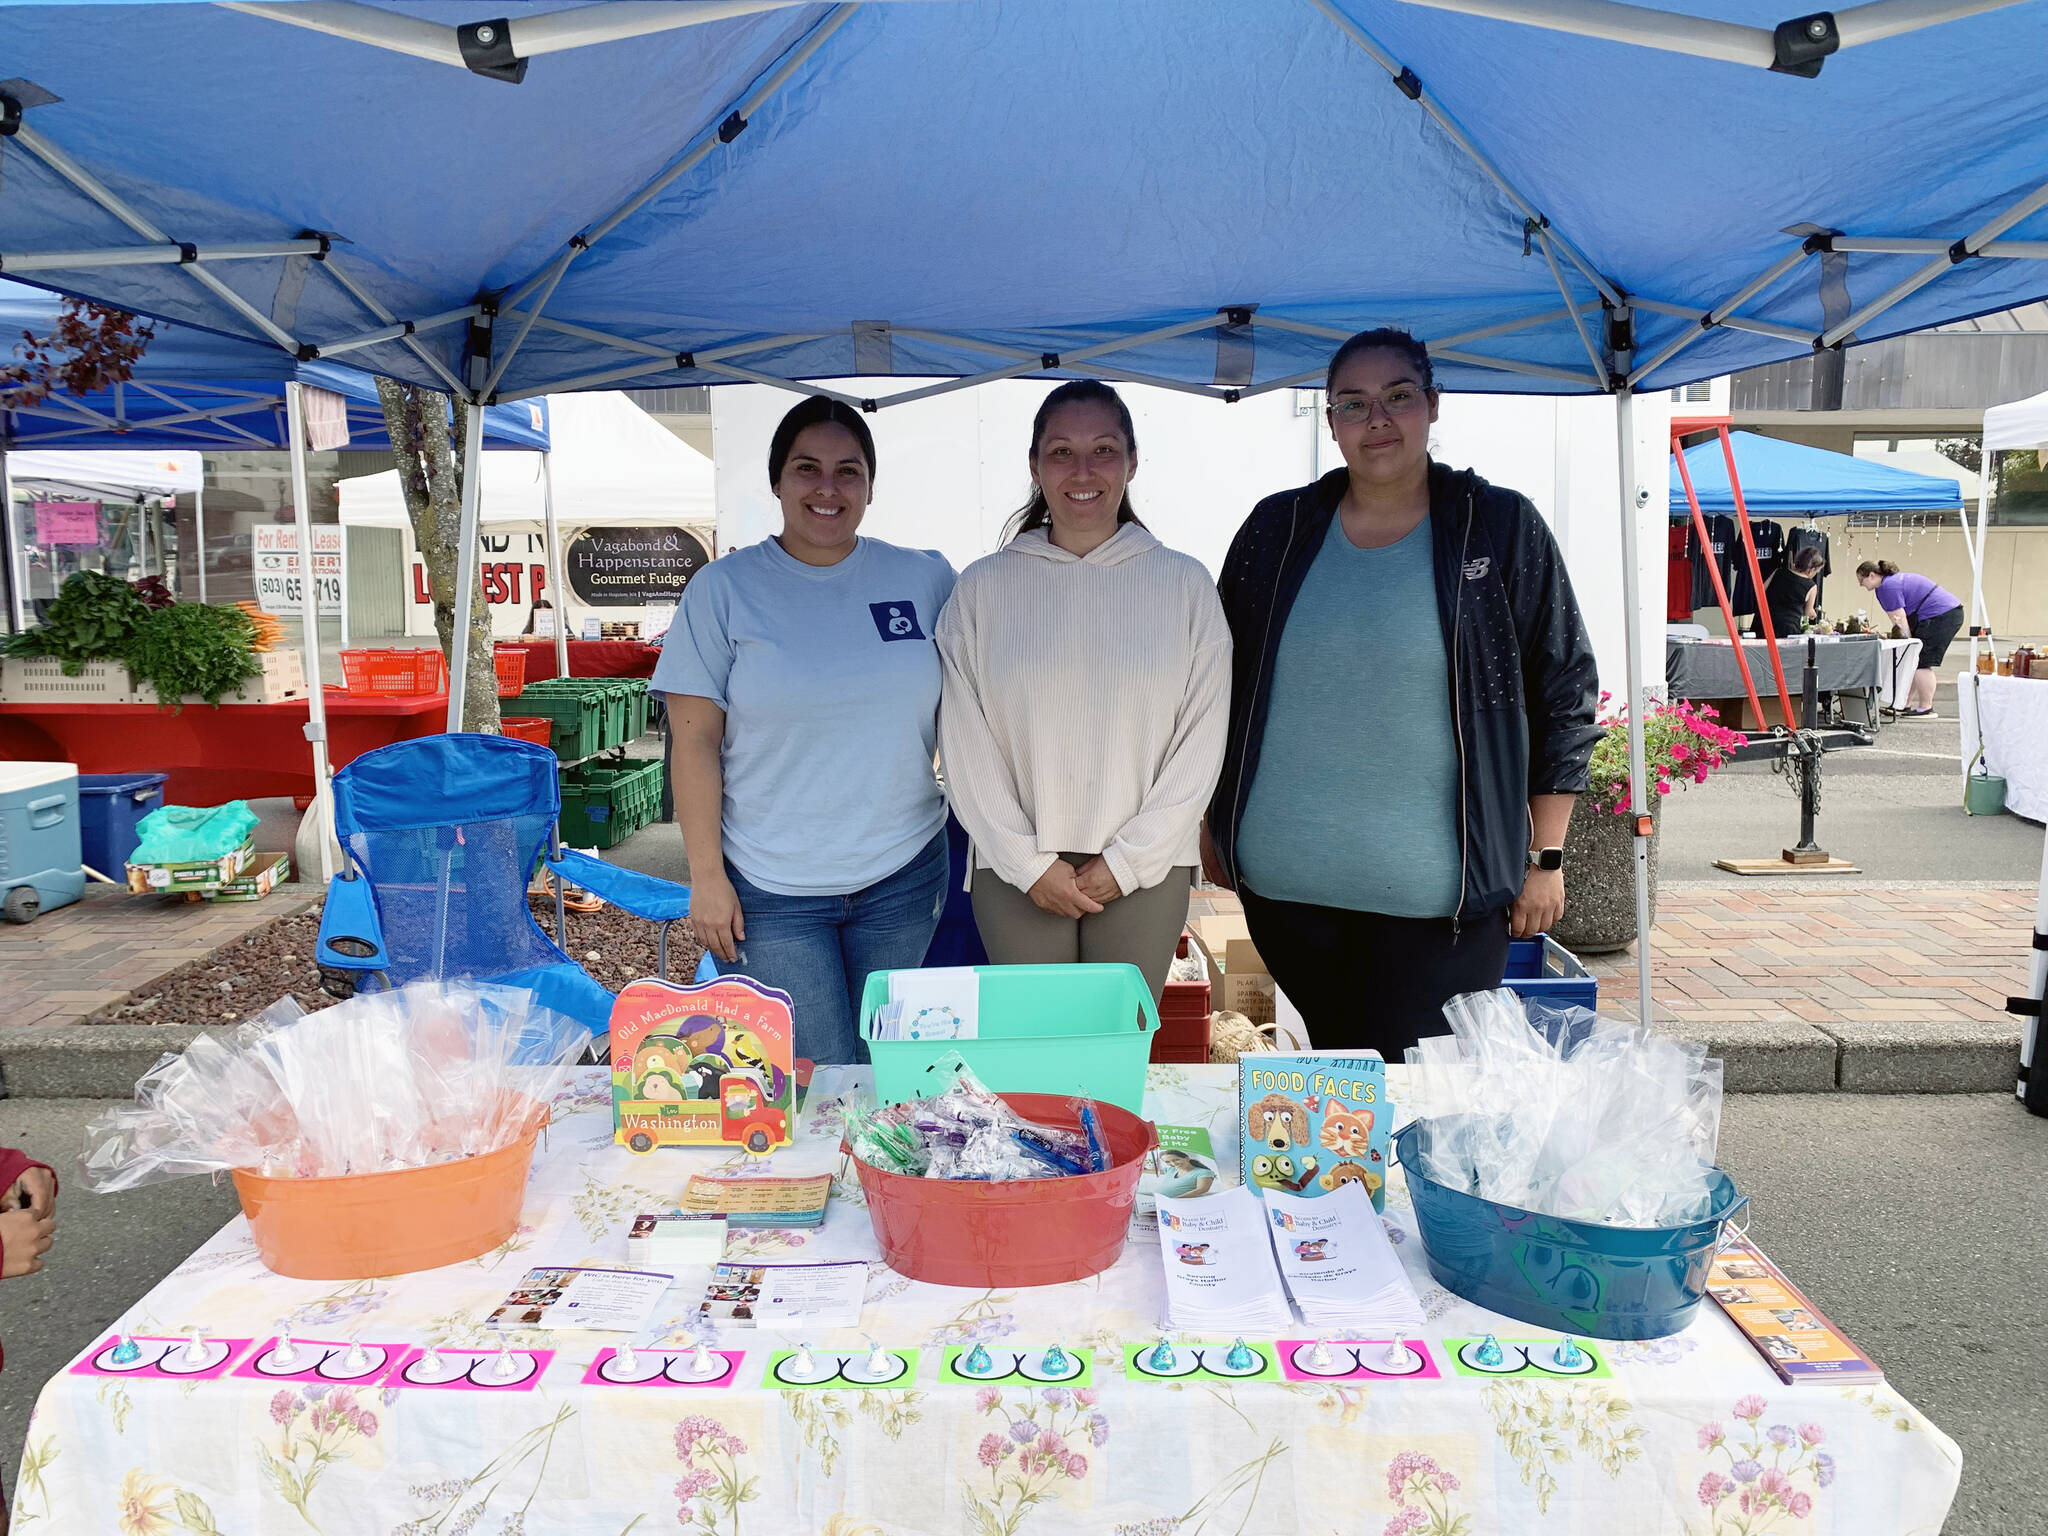 Grays Harbor County Public Health
From left: Talia Hernandez, Mina Fontenelle and Carmela Lopez pose as they celebrate World Breastfeeding Week in August at the Aberdeen Sunday Market.